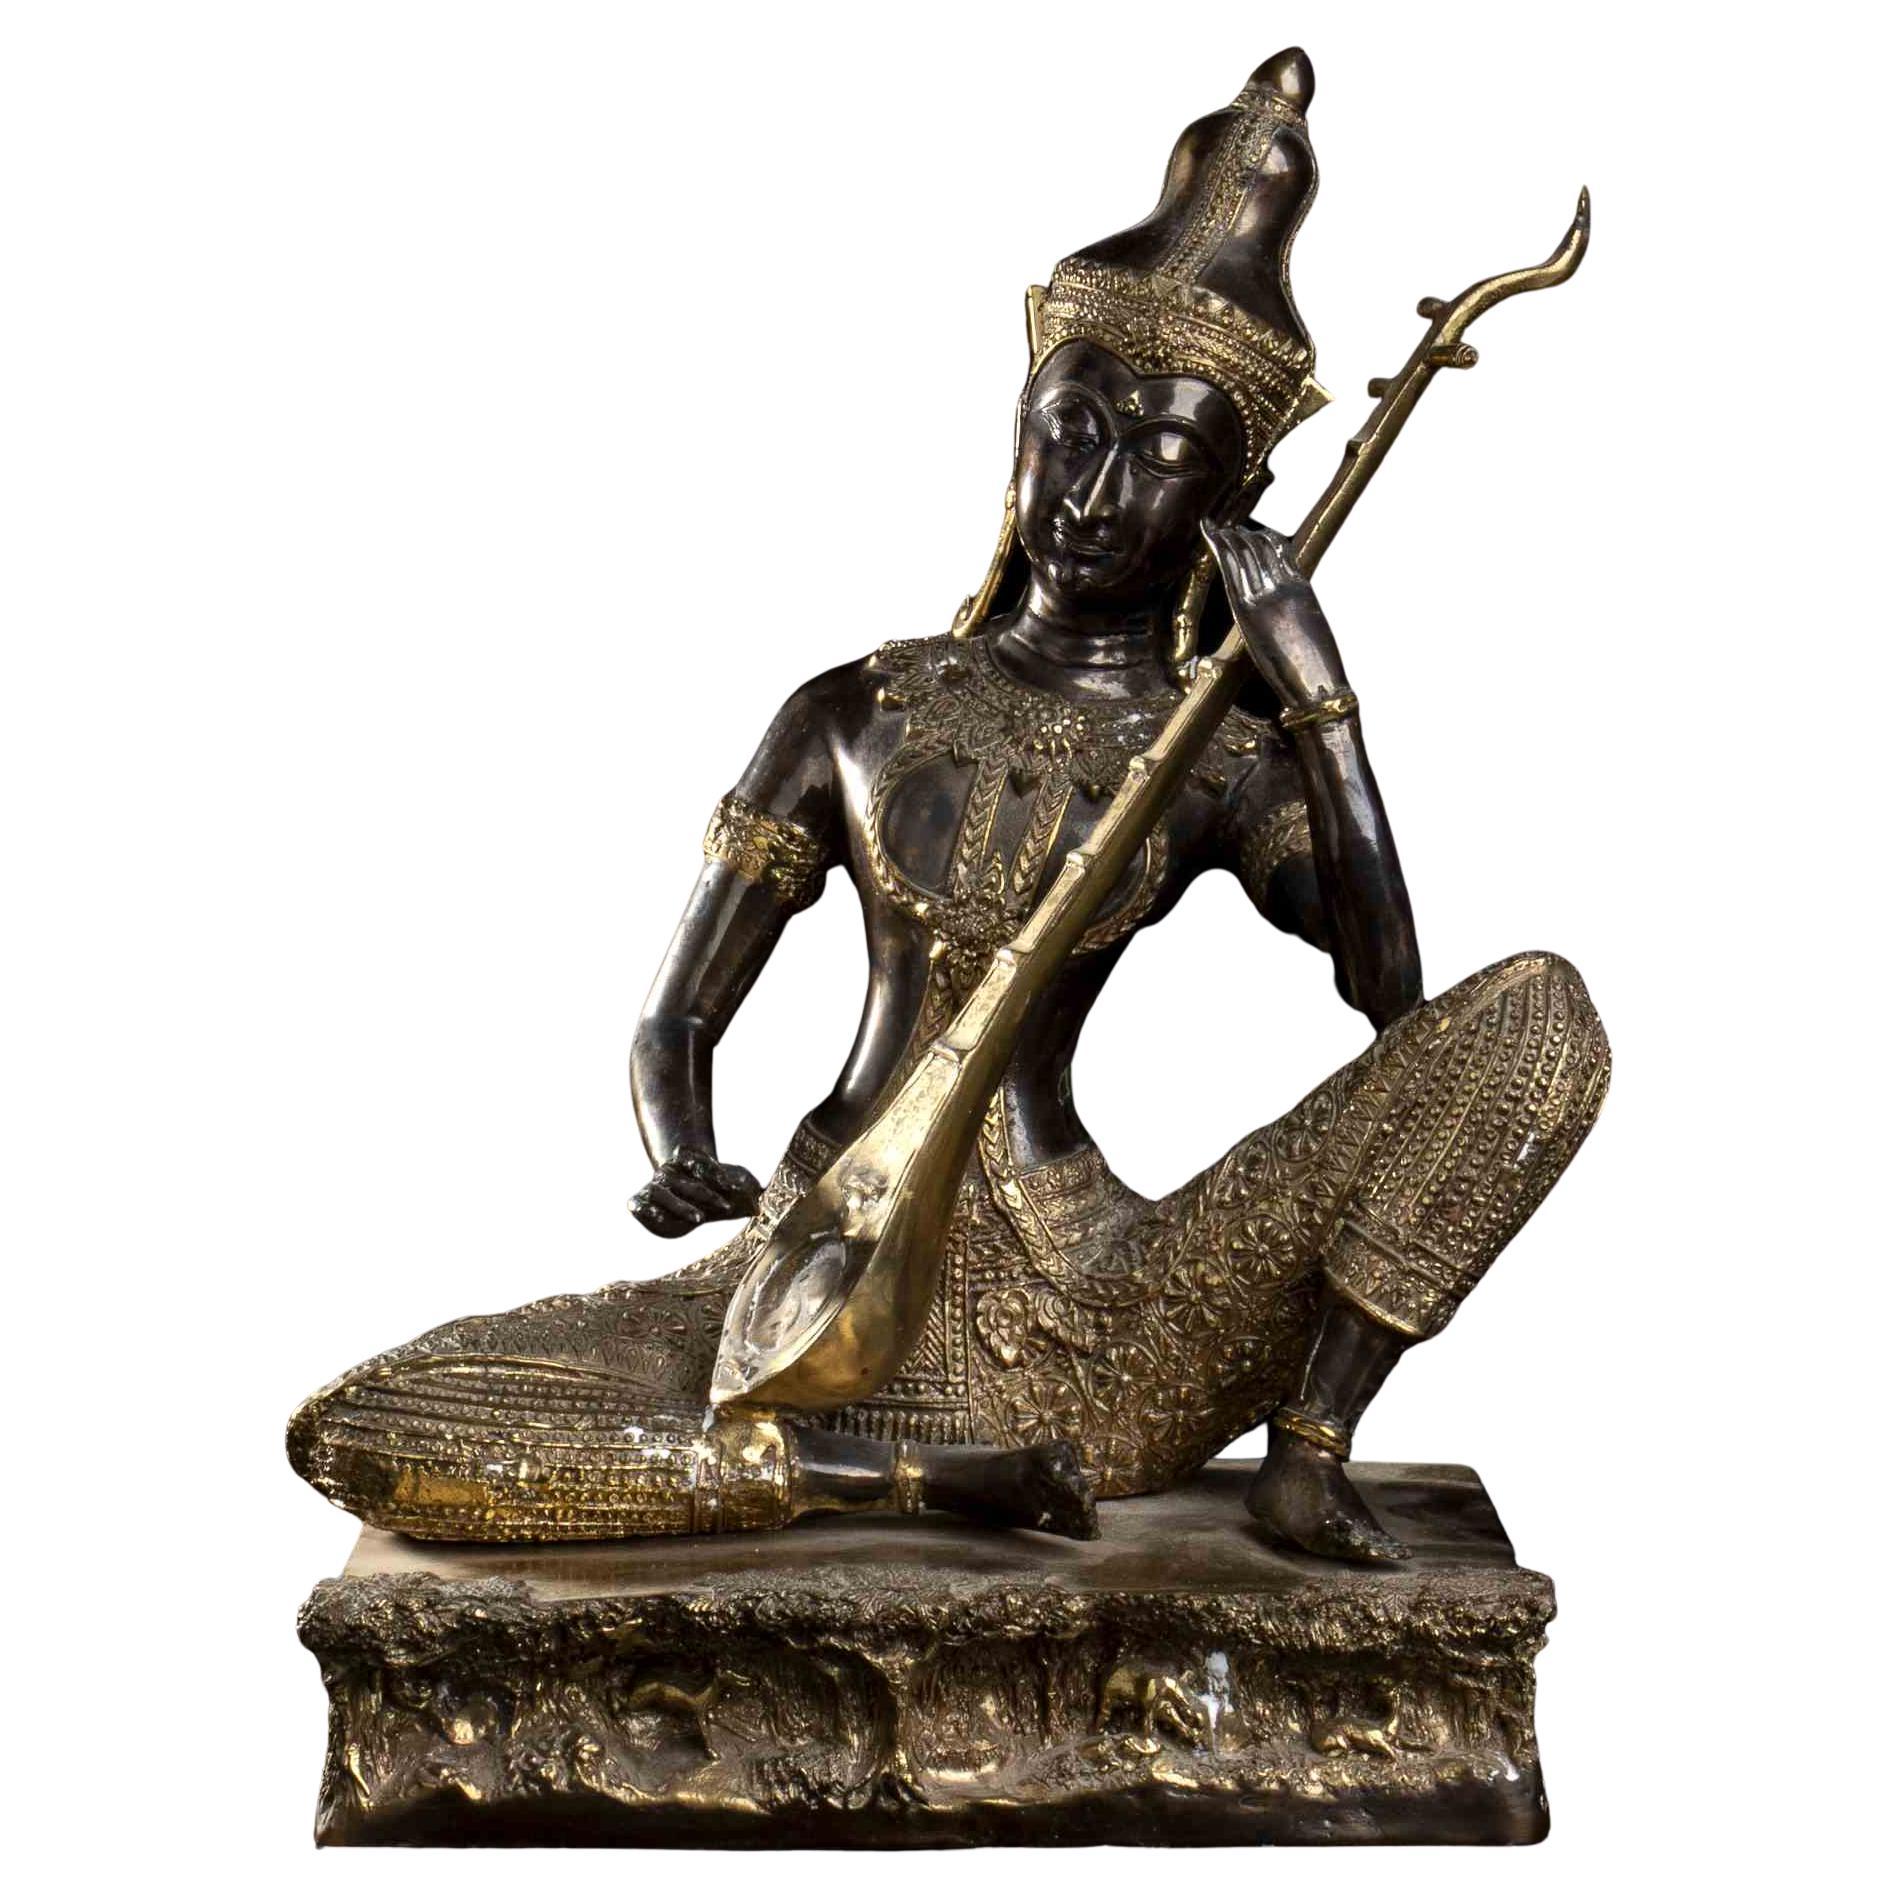 A Partially Gilt Asian Sculpture of Musician, Early 20th Century